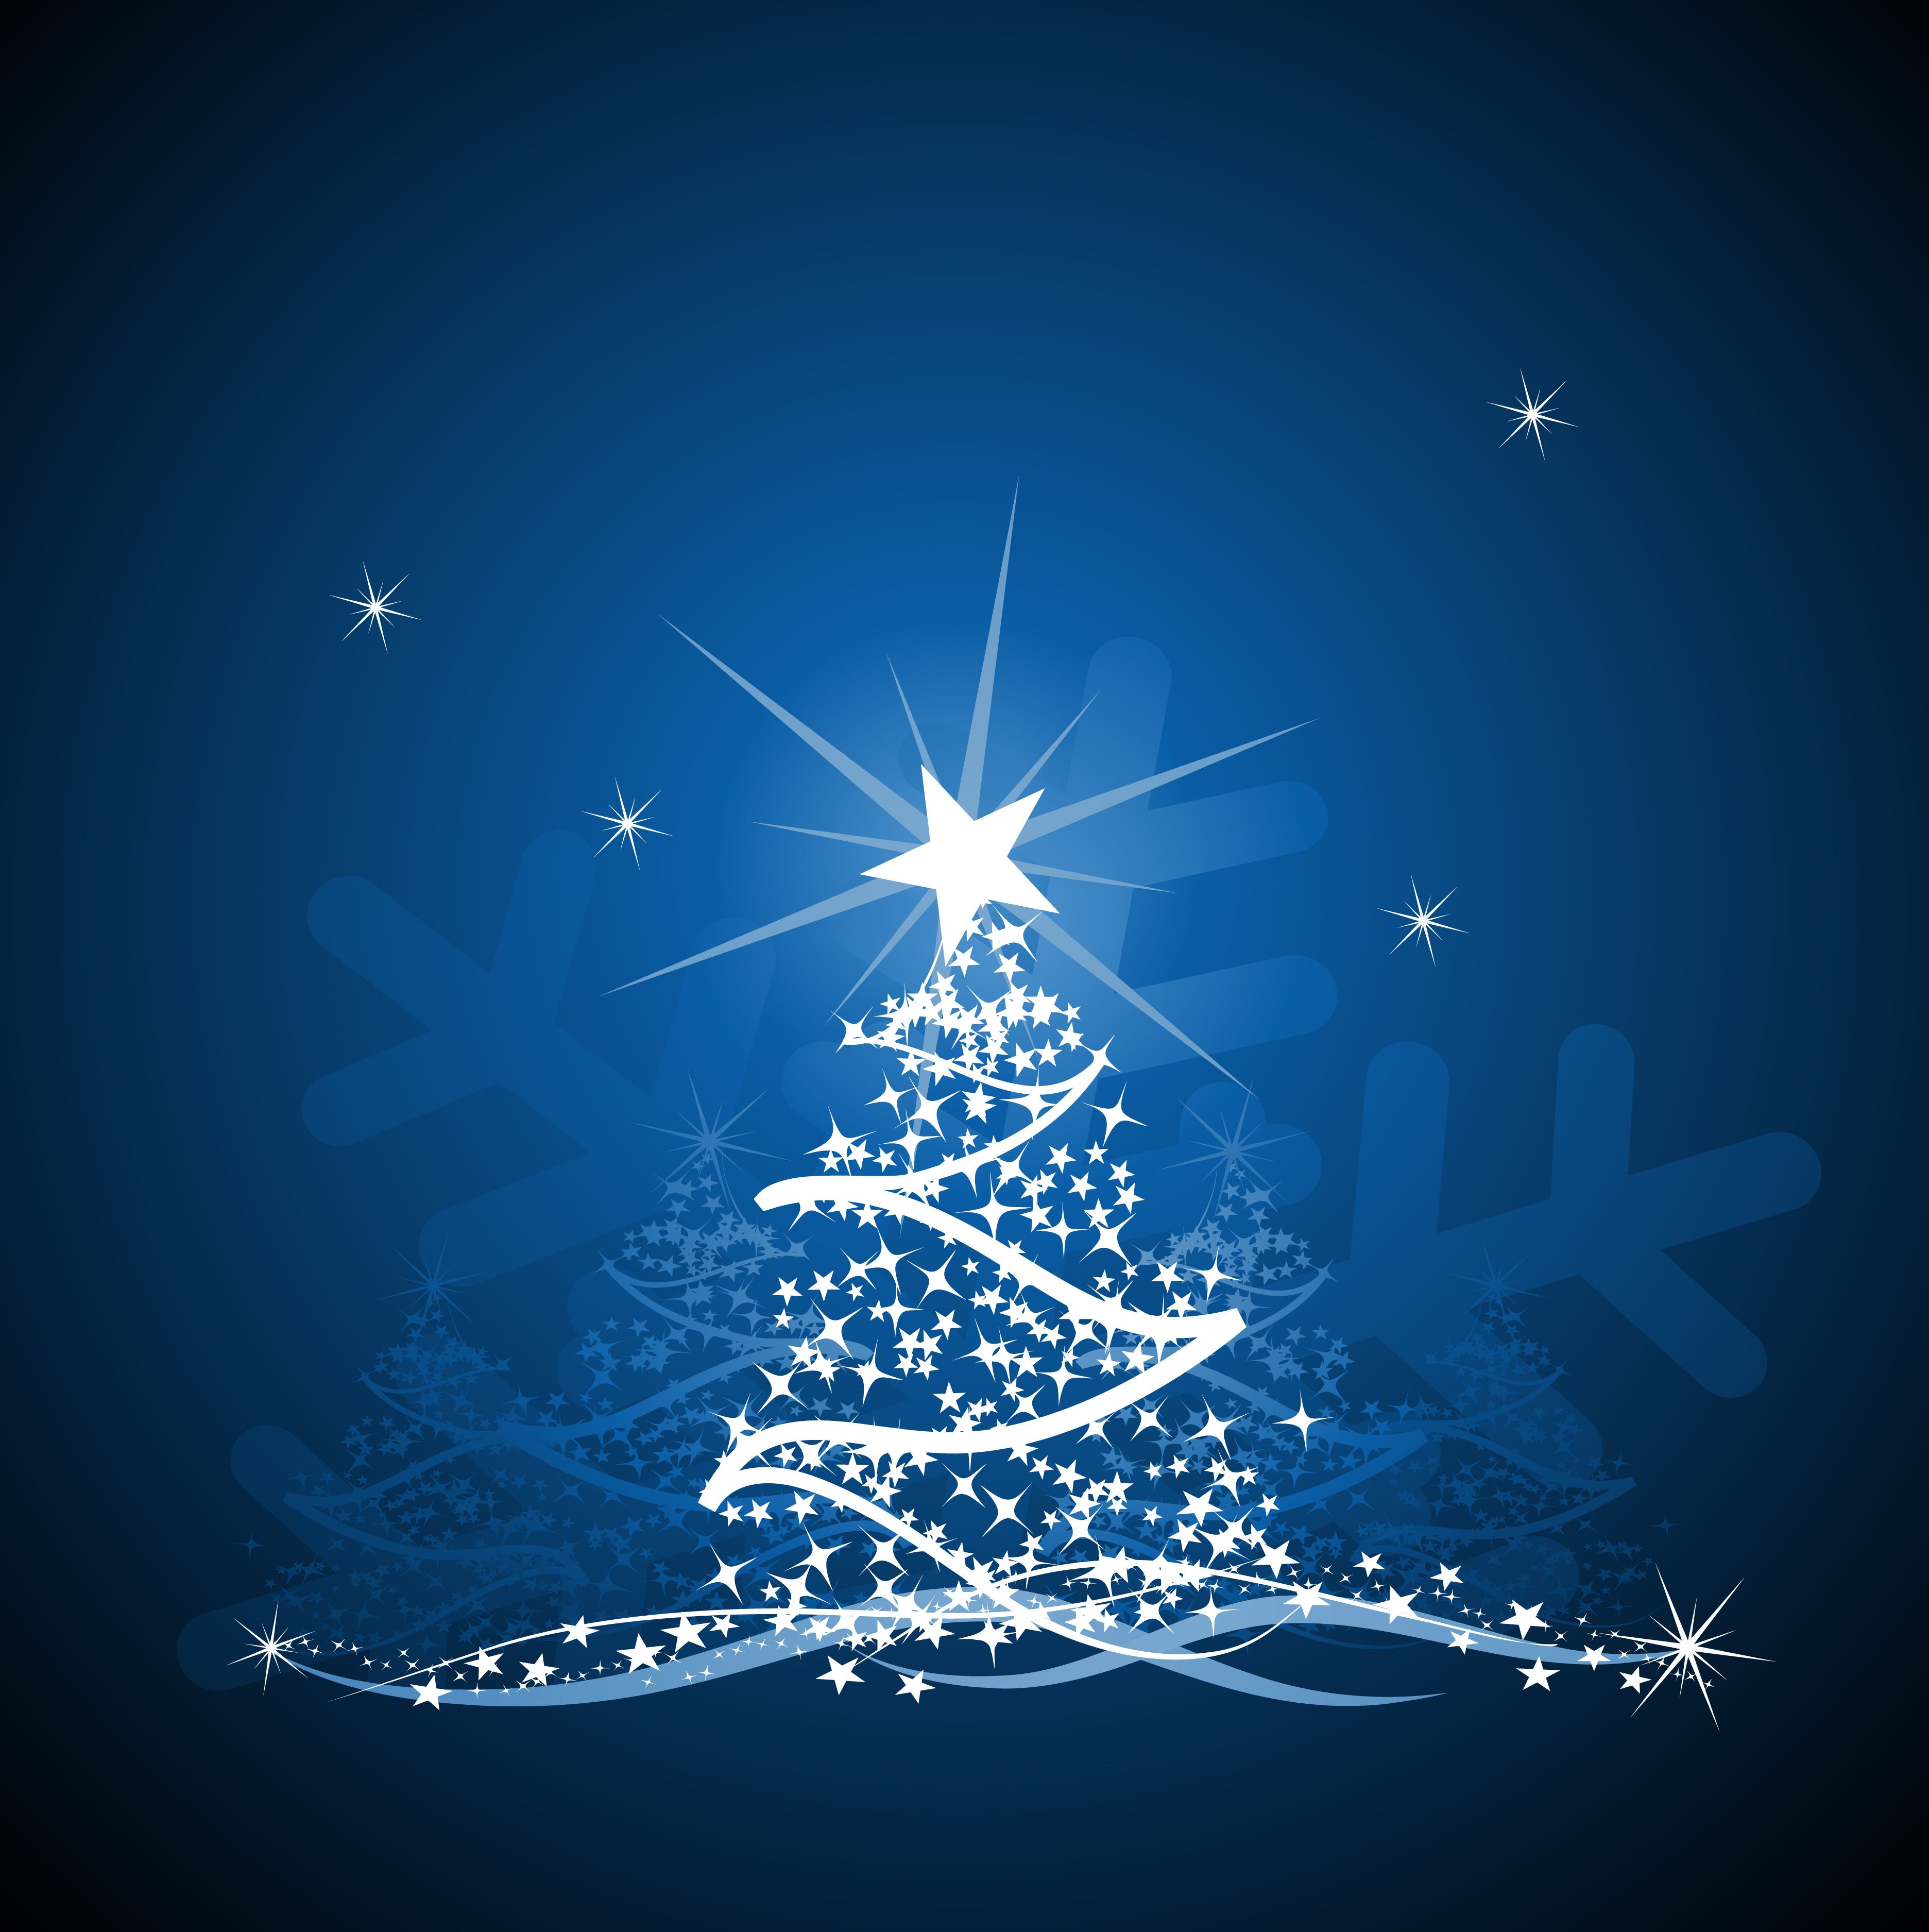 clipart natale per email - photo #44